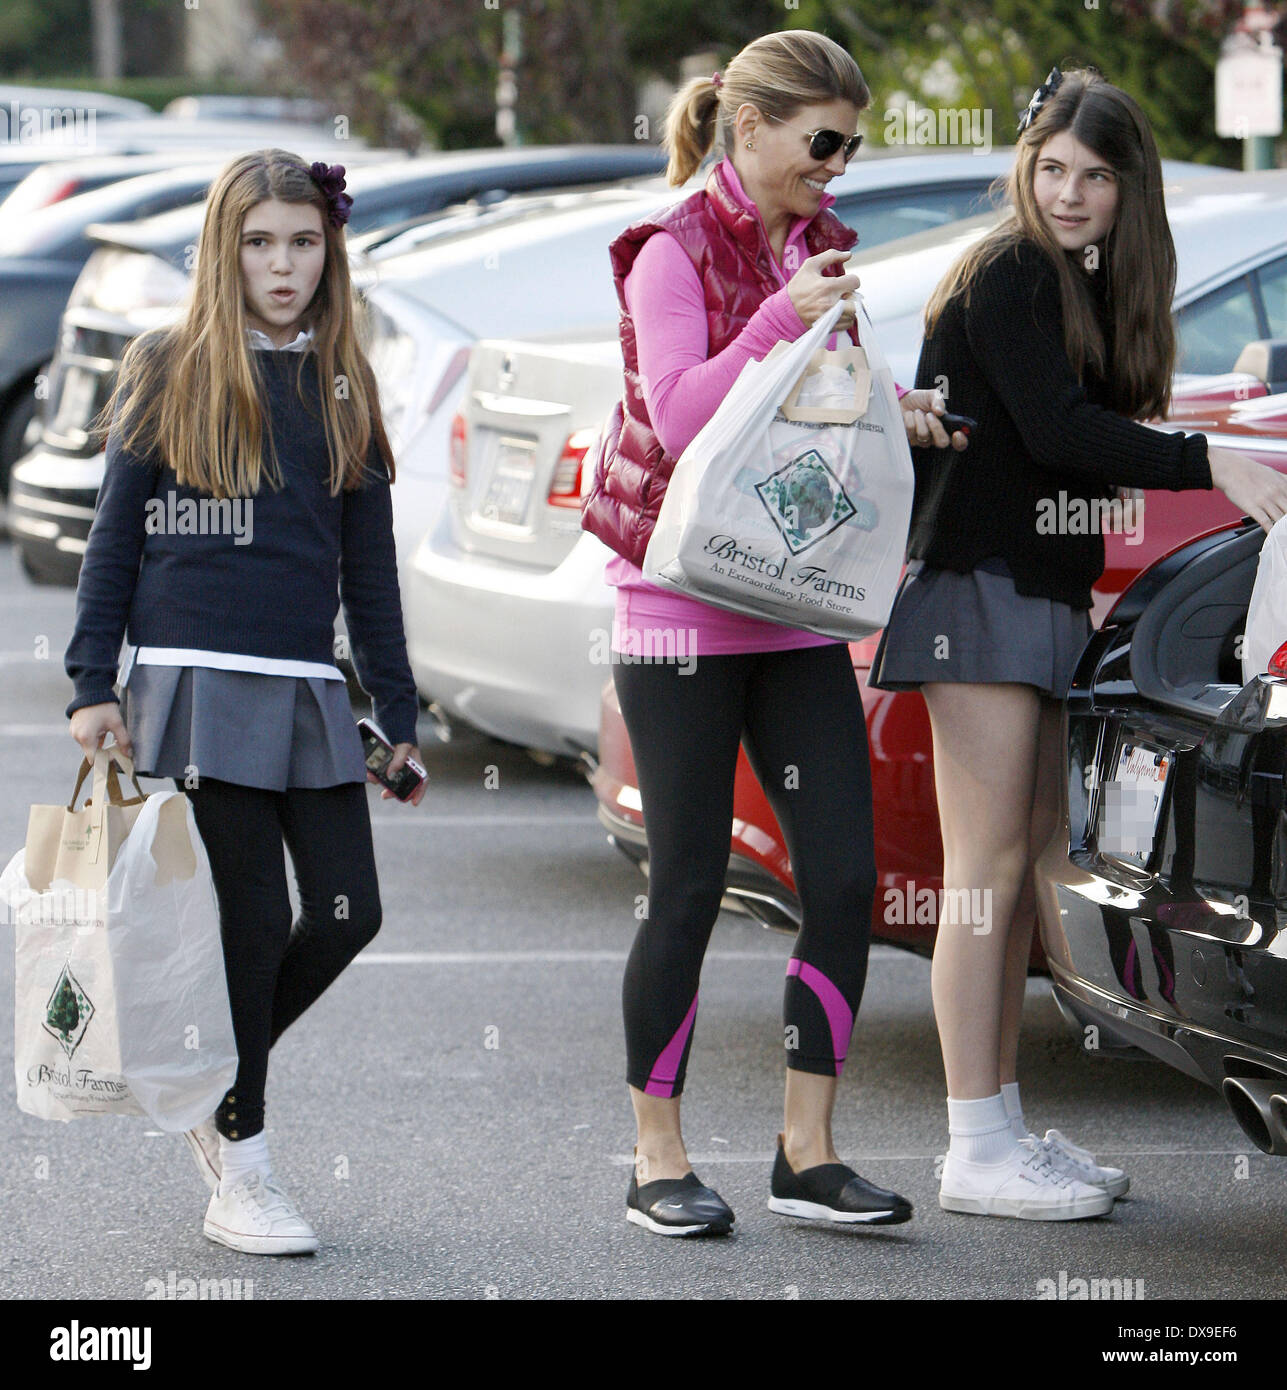 Lori Loughlin returns to her car with daughter's Isabella Rose and Olivia Jade after shopping at Bristol Farms Los Angeles, California - 14.11.12 Featuring: Lori Loughlin returns to her car with daughter's Isabella Rose and Olivia Jade after shopping at Bristol Farms When: 14 Nov 2012 Stock Photo